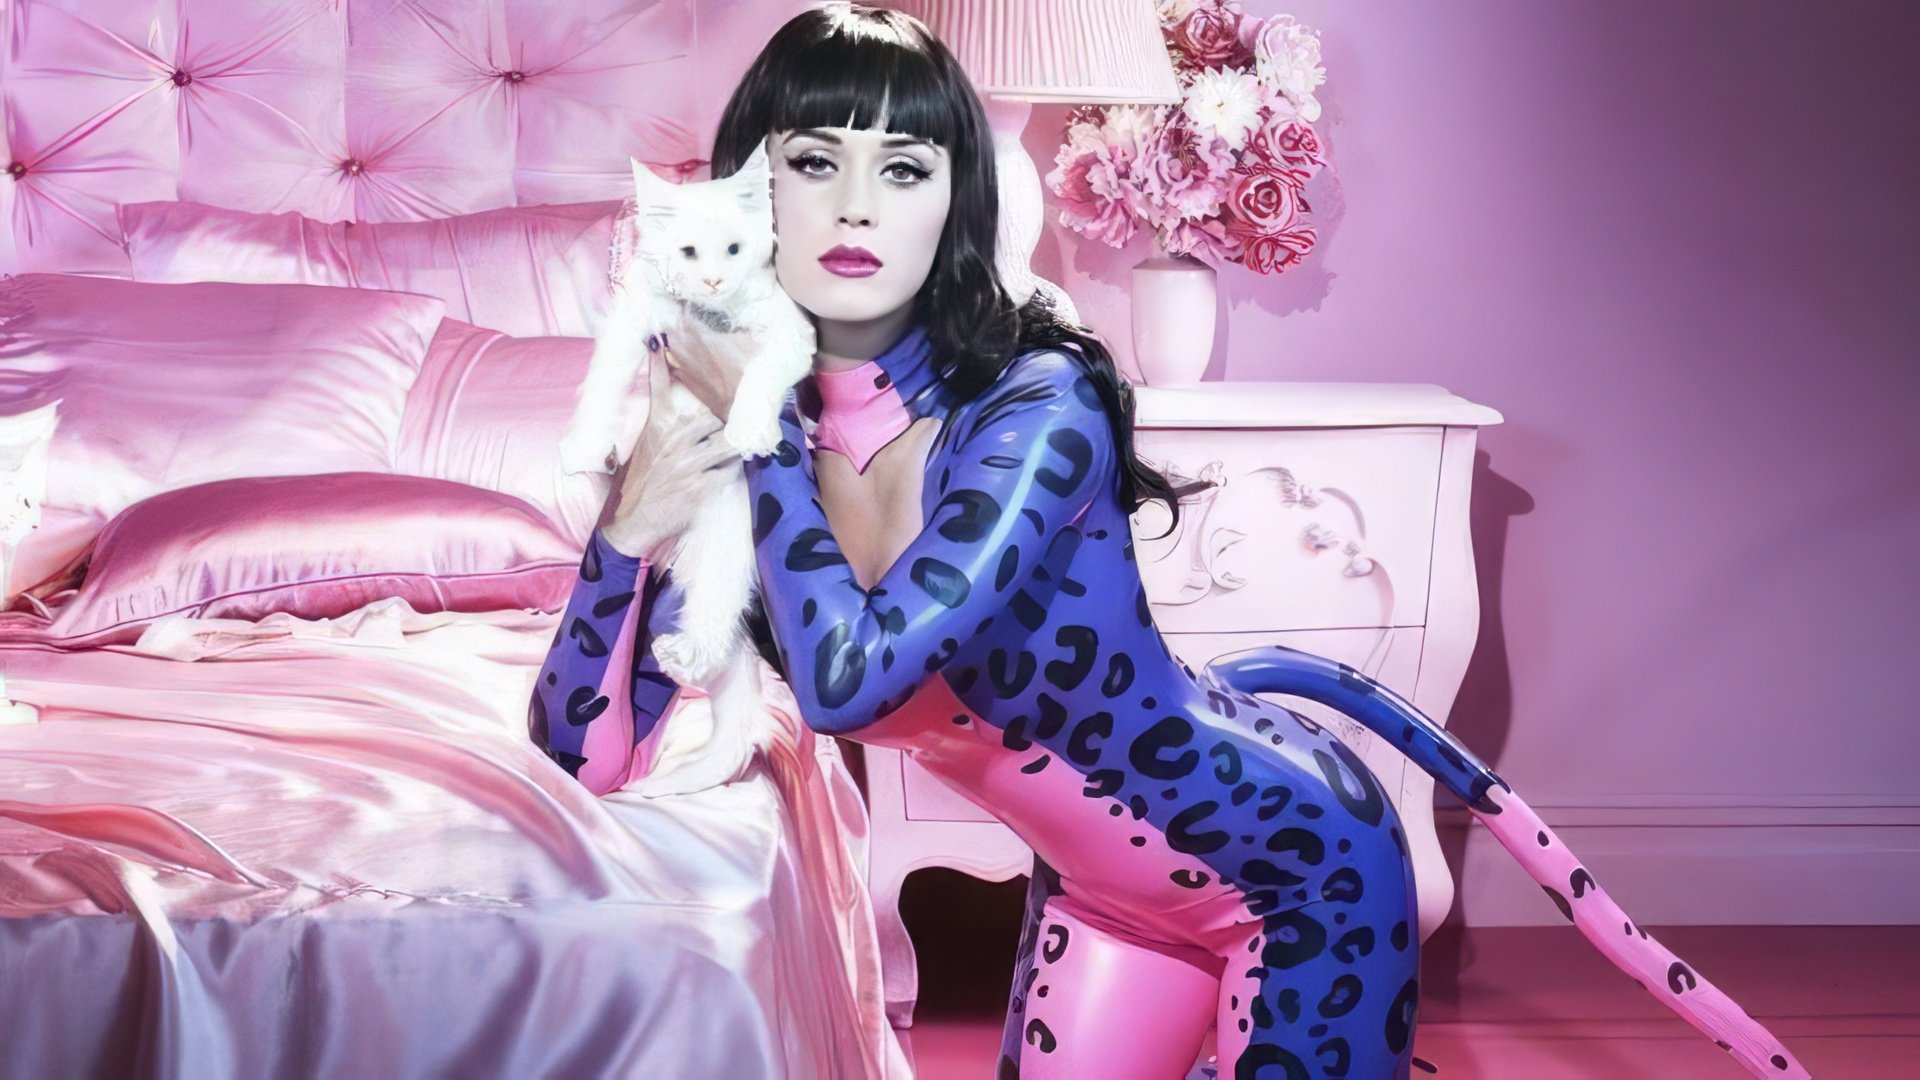 Photo shoot to advertise the fragrance Meow by Katy Perry